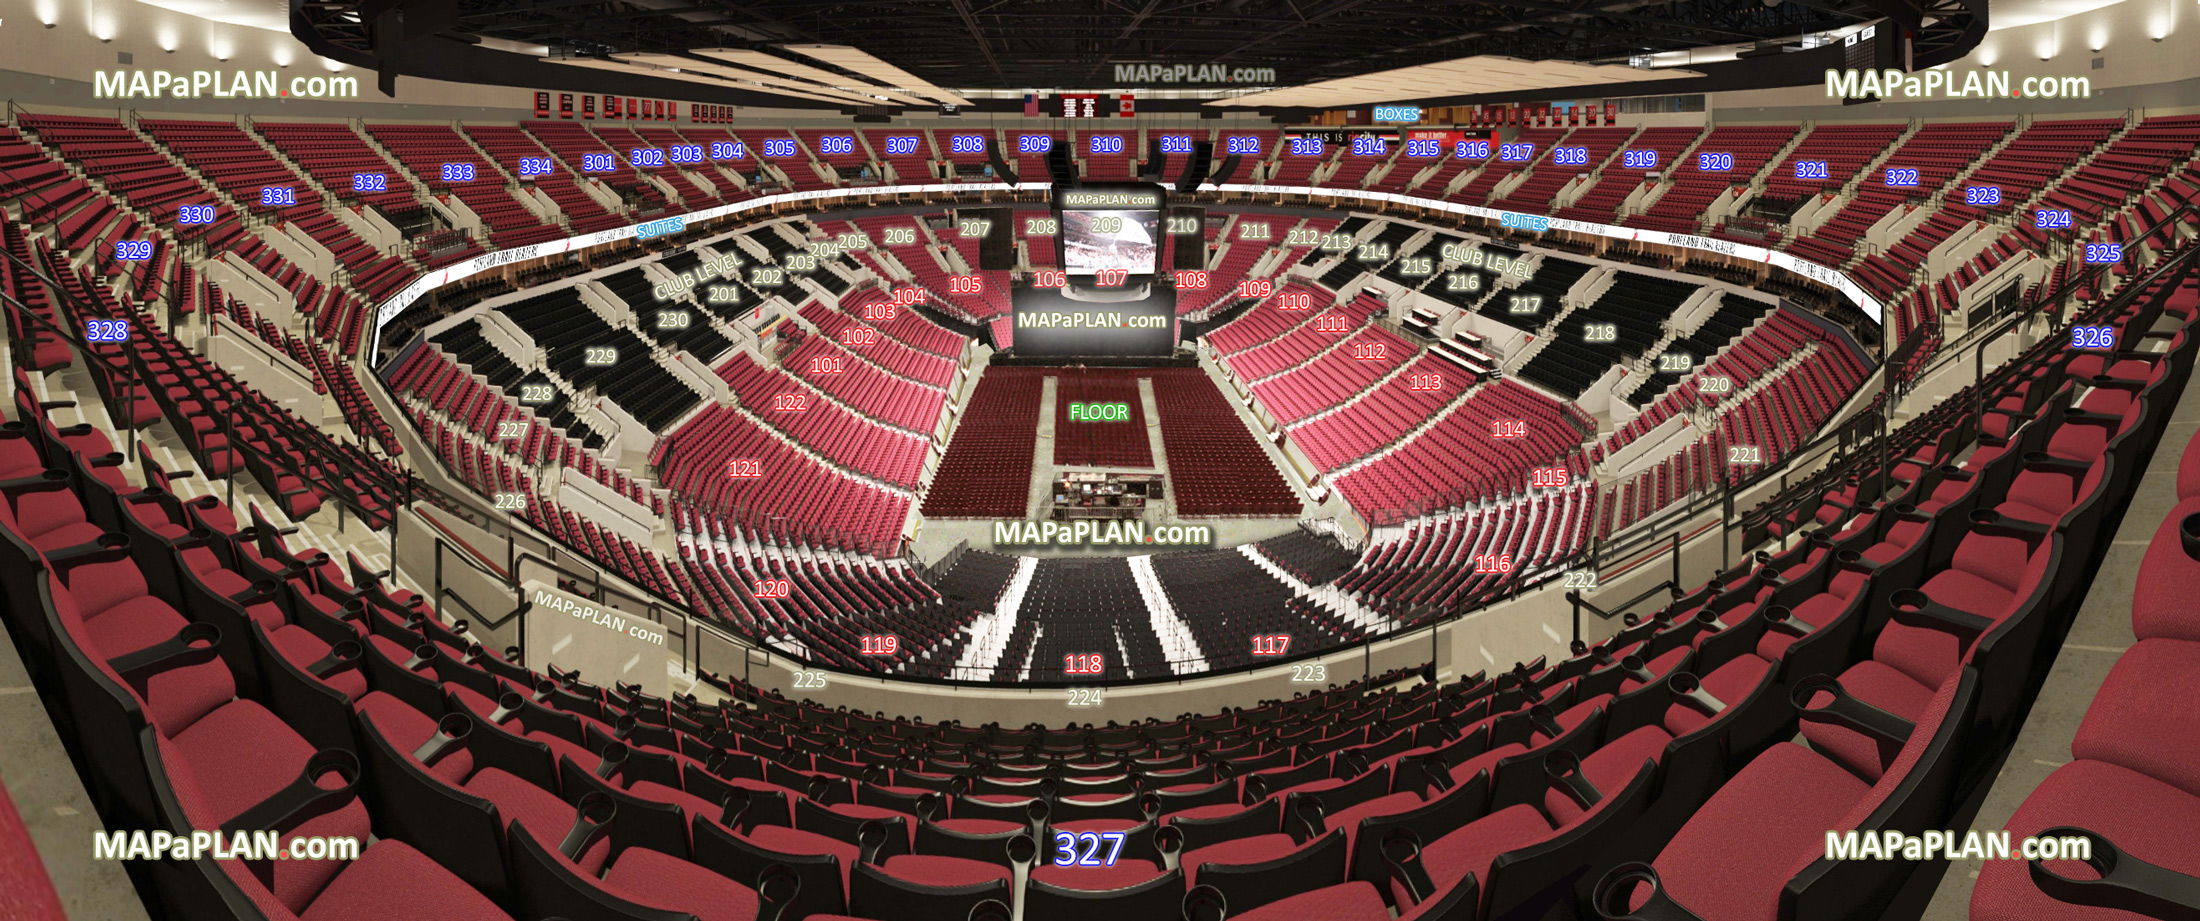 view section 327 row o seat 10 rose garden arena virtual venue 3d interactive interior tour inside concert stage picture lower middle upper level suites general admission ga  Portland Moda Center seating chart